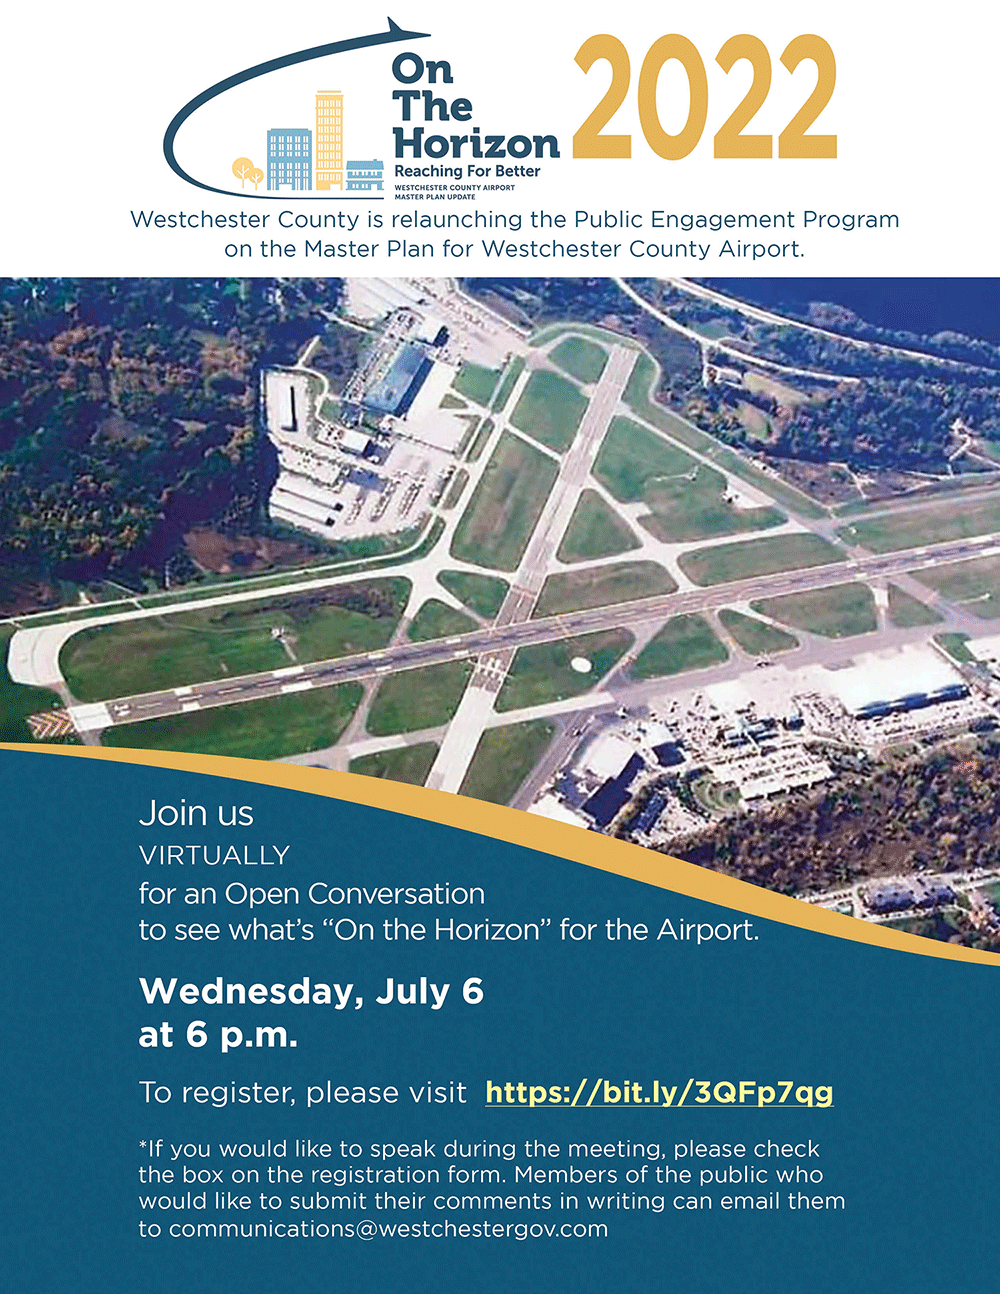 Title: On The Horizon 2022 - Description: Westchester County is Relaunching the Public Engagement Program on the Master Plan for Westchester County Airport.Join us virtuallyfor an Open Conversation to see what’s “On the Horizon” for the Airport.Wednesday, July 6 at 6 p.m. To register, please visit  https://bit.ly/3QFp7qg *If you would like to speak during the meeting, please checkthe box on the registration form. Members of the public whowould like to submit their comments in writing can email them to communications@westchestergov.com